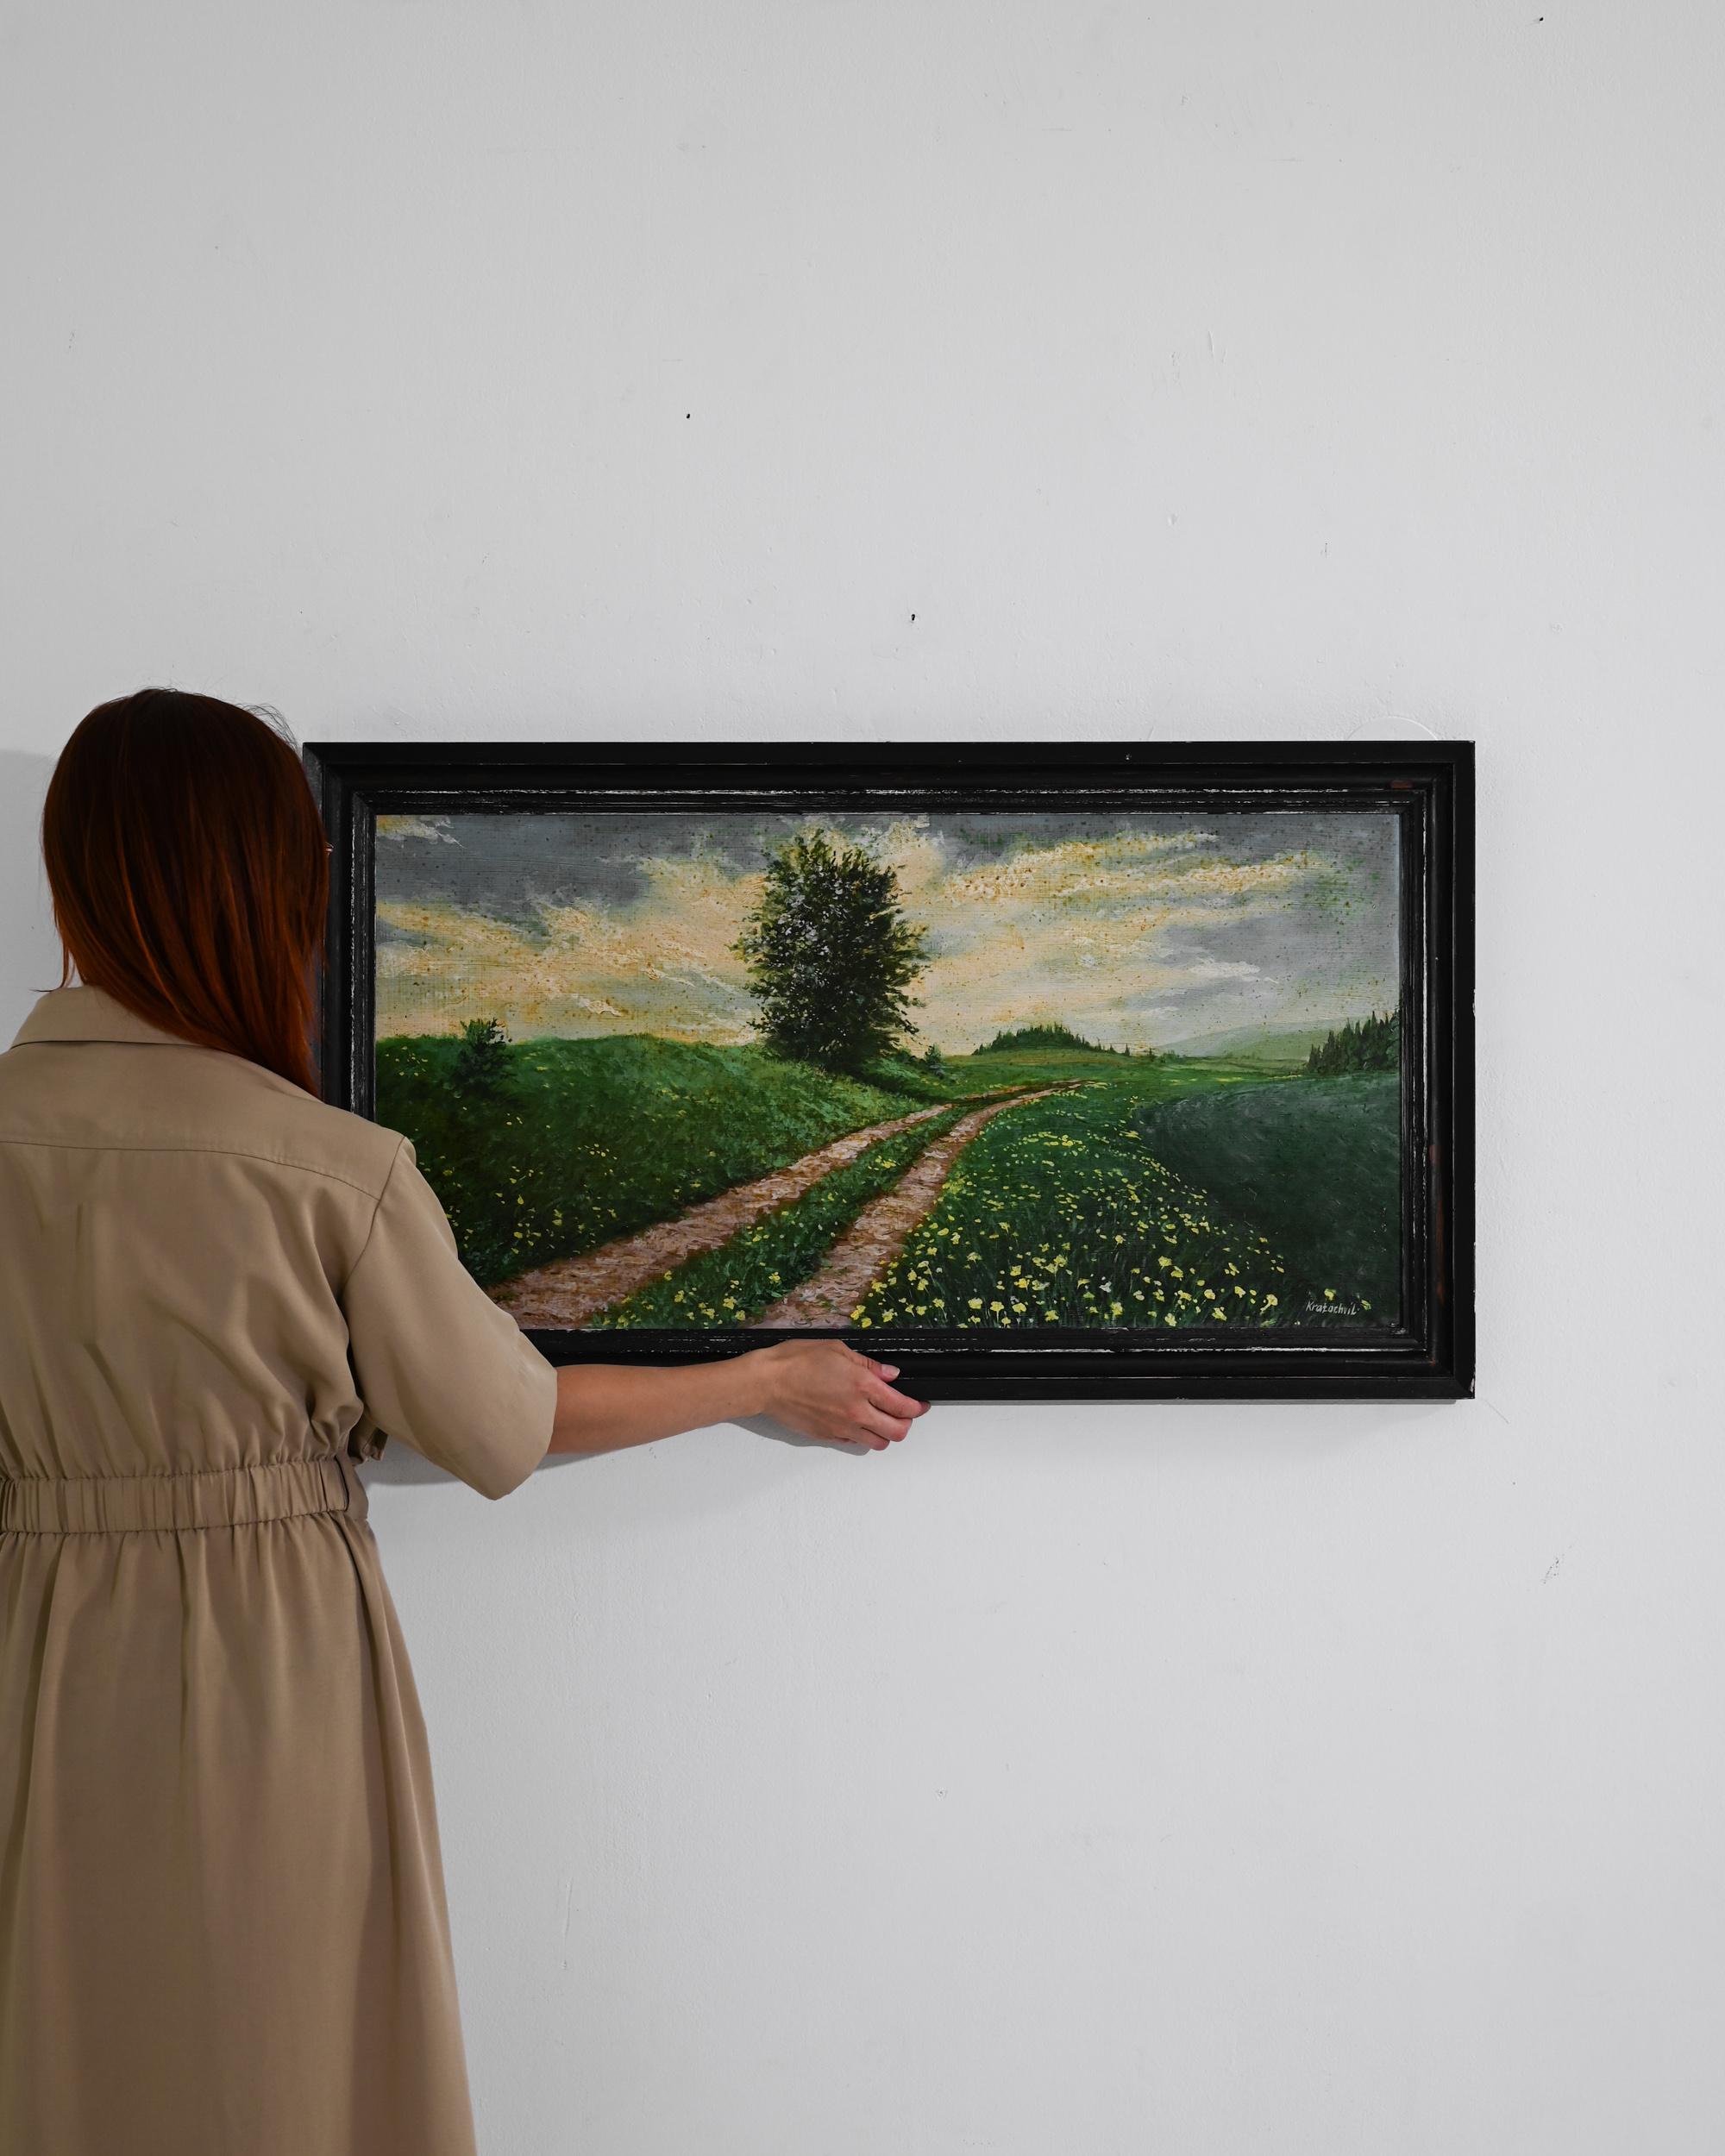 This 20th-century Czech artwork encapsulates the serene beauty of the pastoral landscape within its wooden frame. The painting invites viewers to wander down the winding path, flanked by lush meadows and dotted with wildflowers that seem to sway